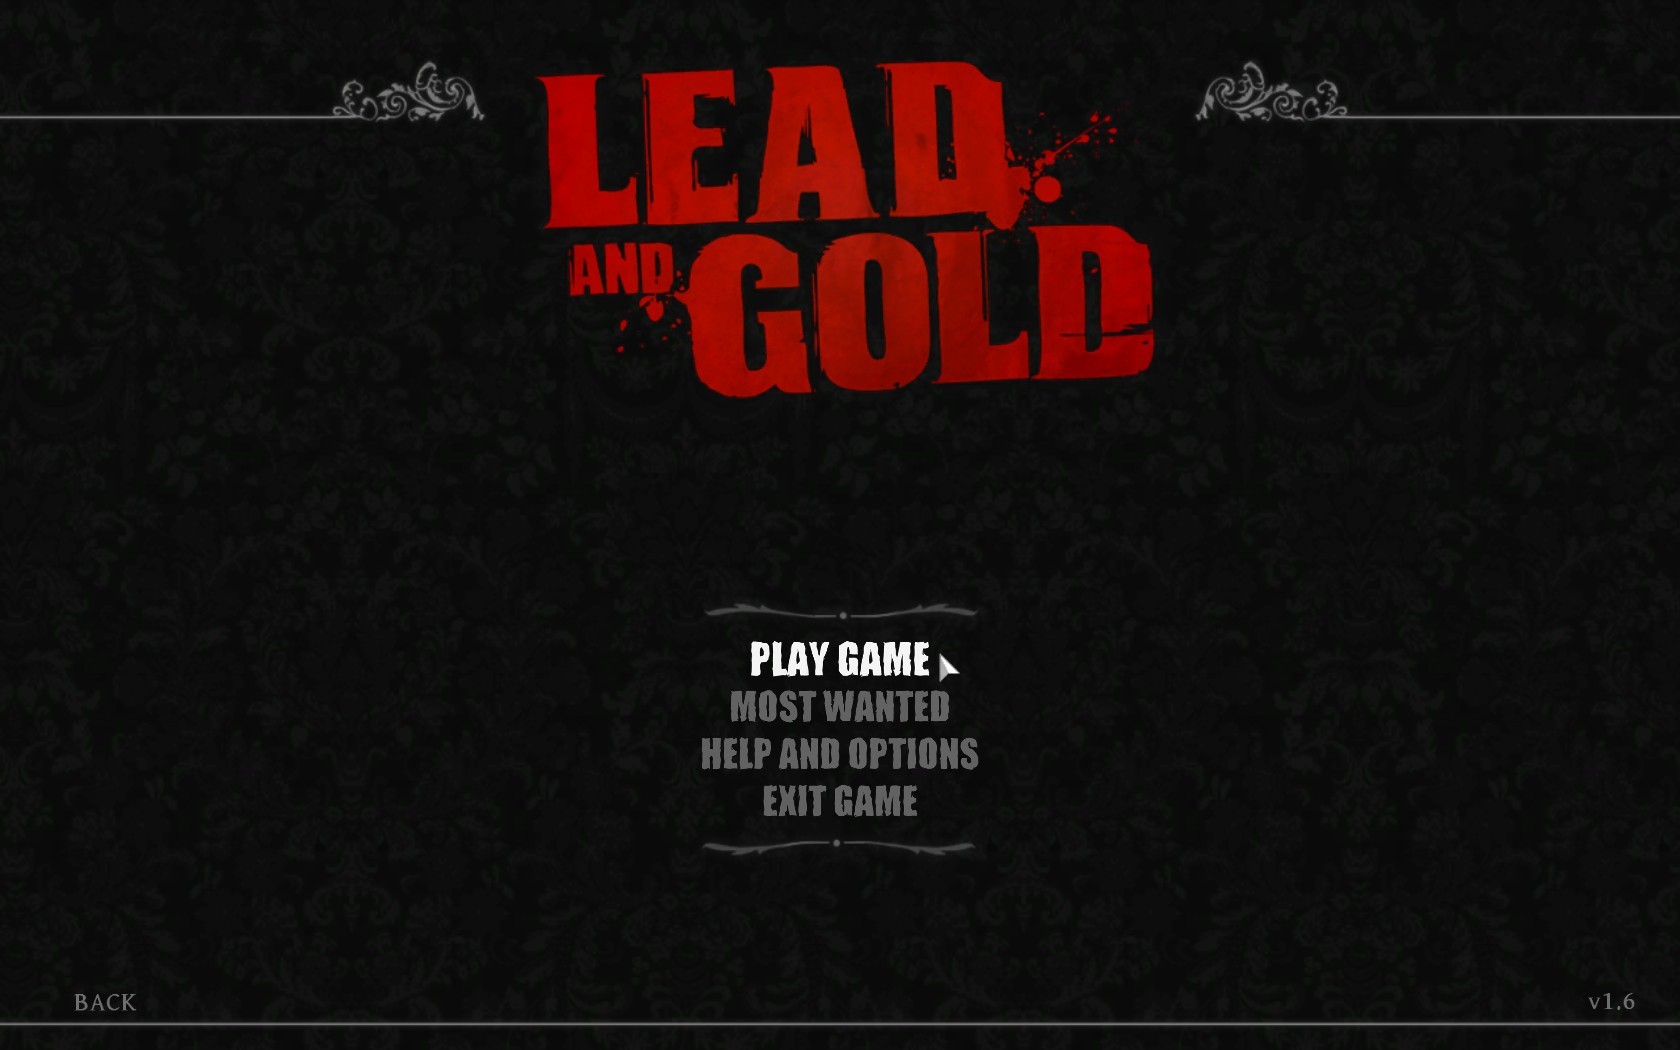 Steam lead and gold фото 51